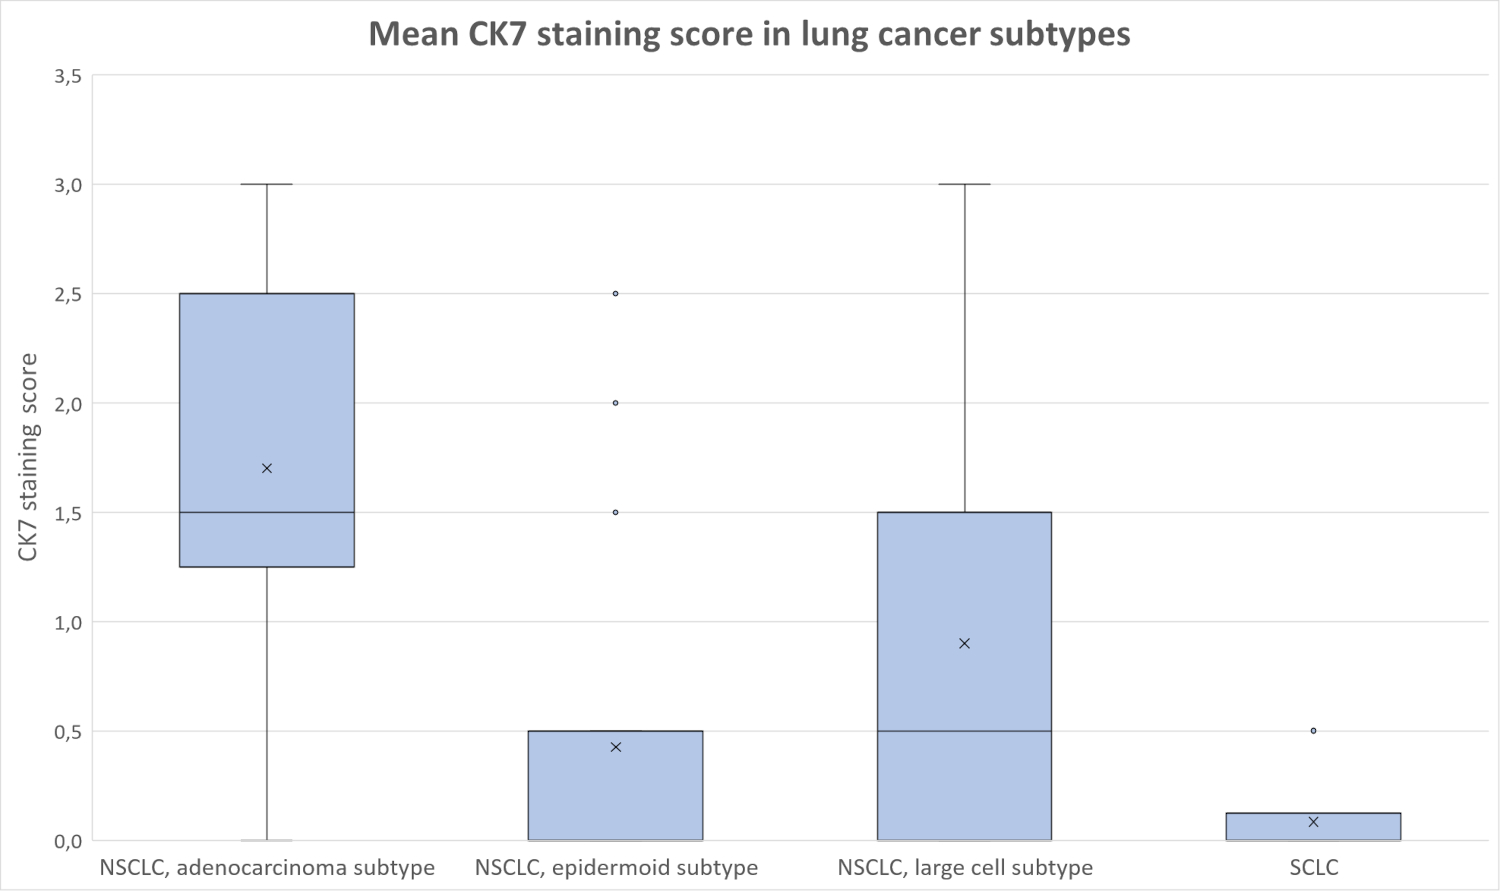 A Diagramm of mean CK7 staining scores of PDX subtypes